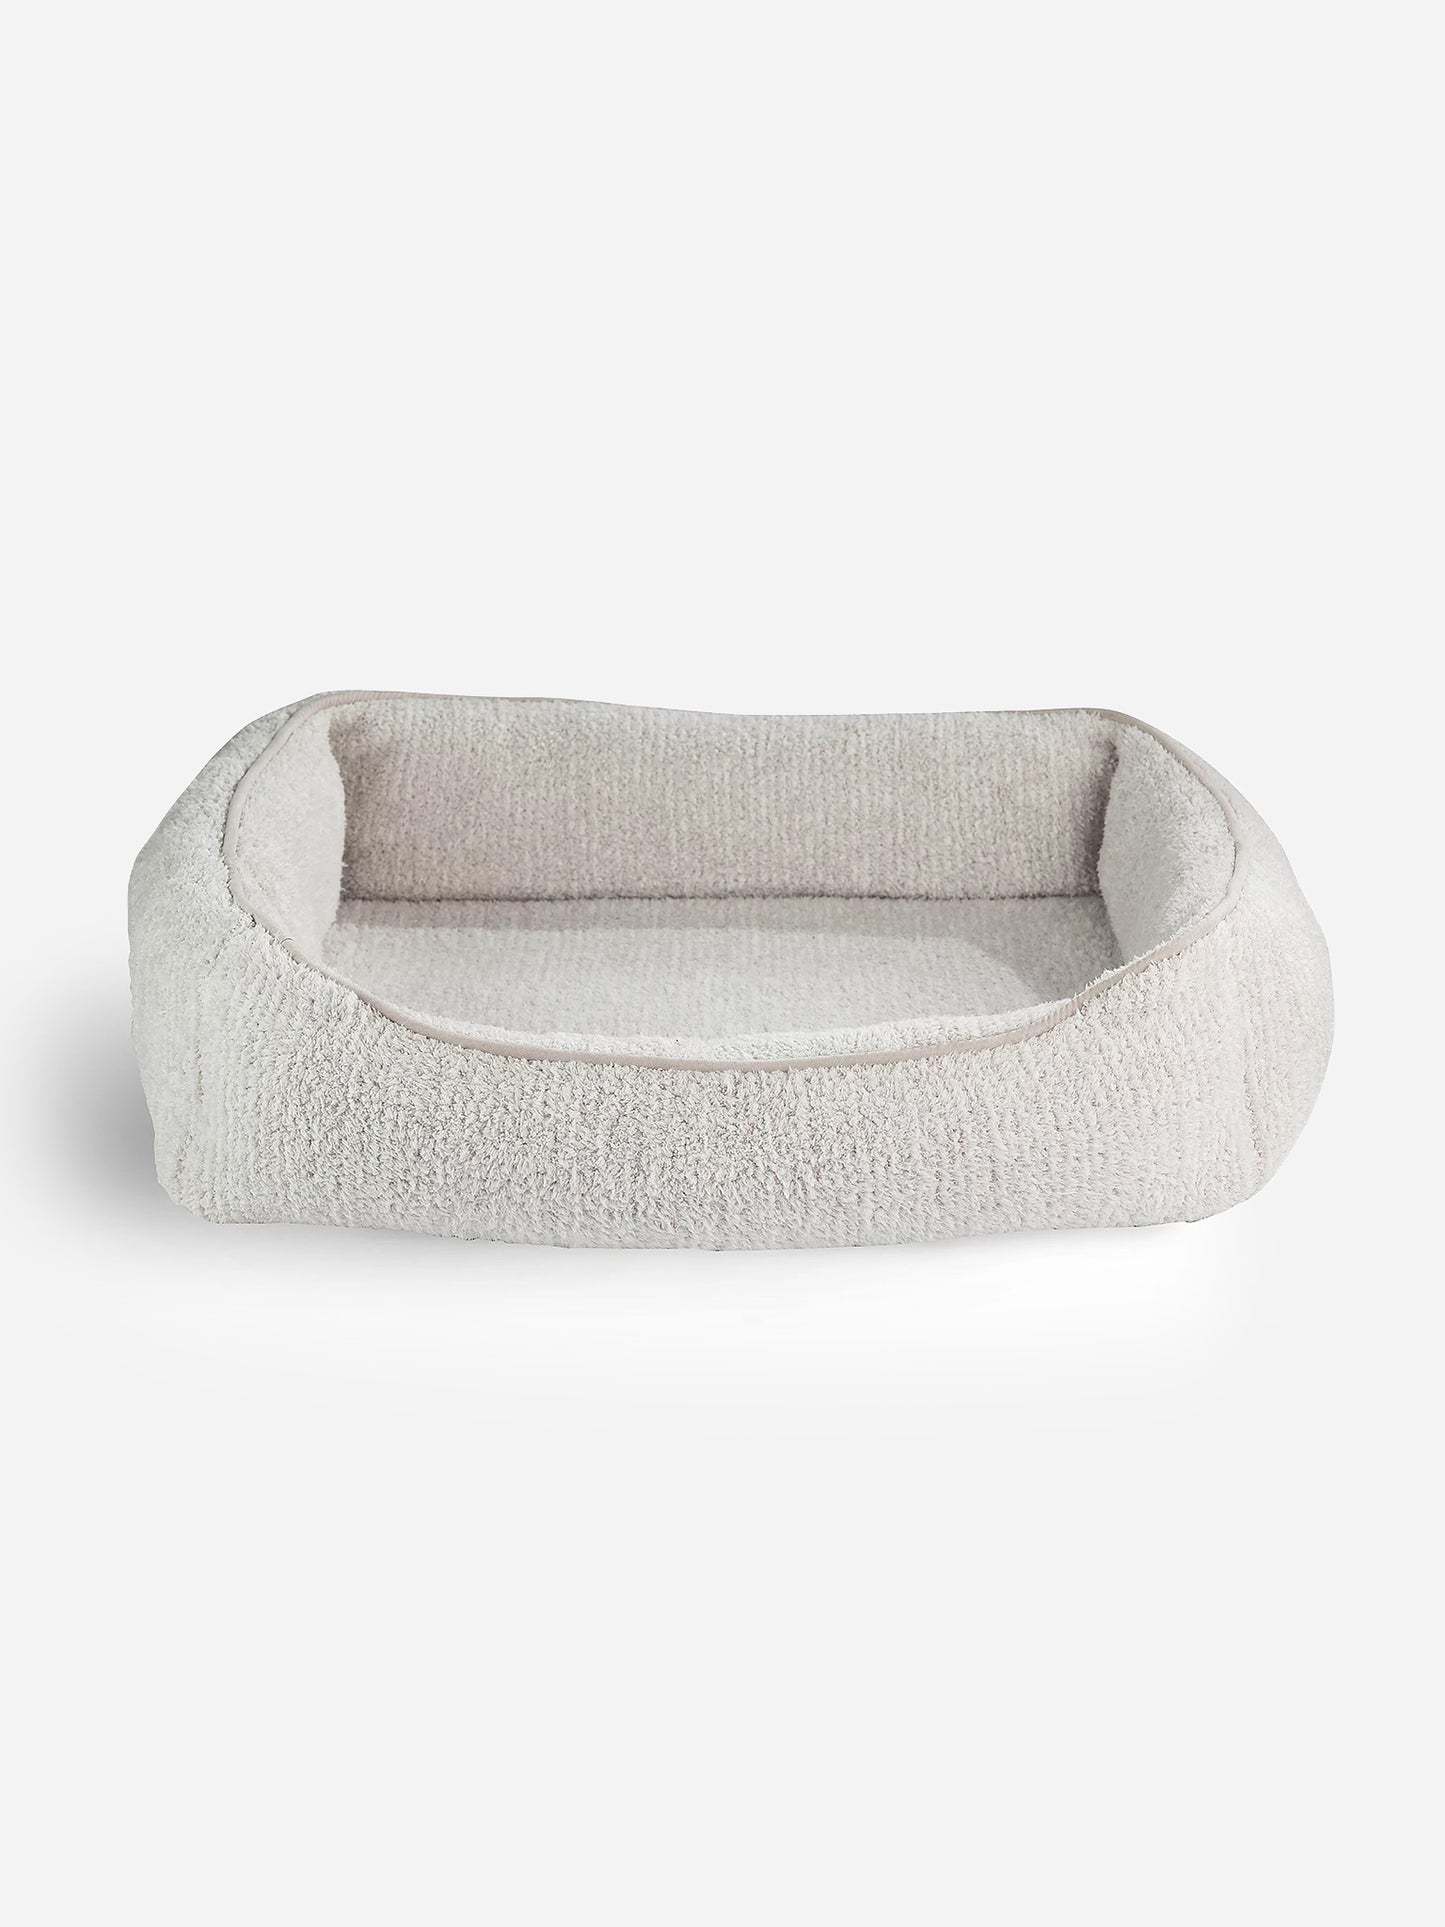 Barefoot Dreams CozyChic® Pet Bed